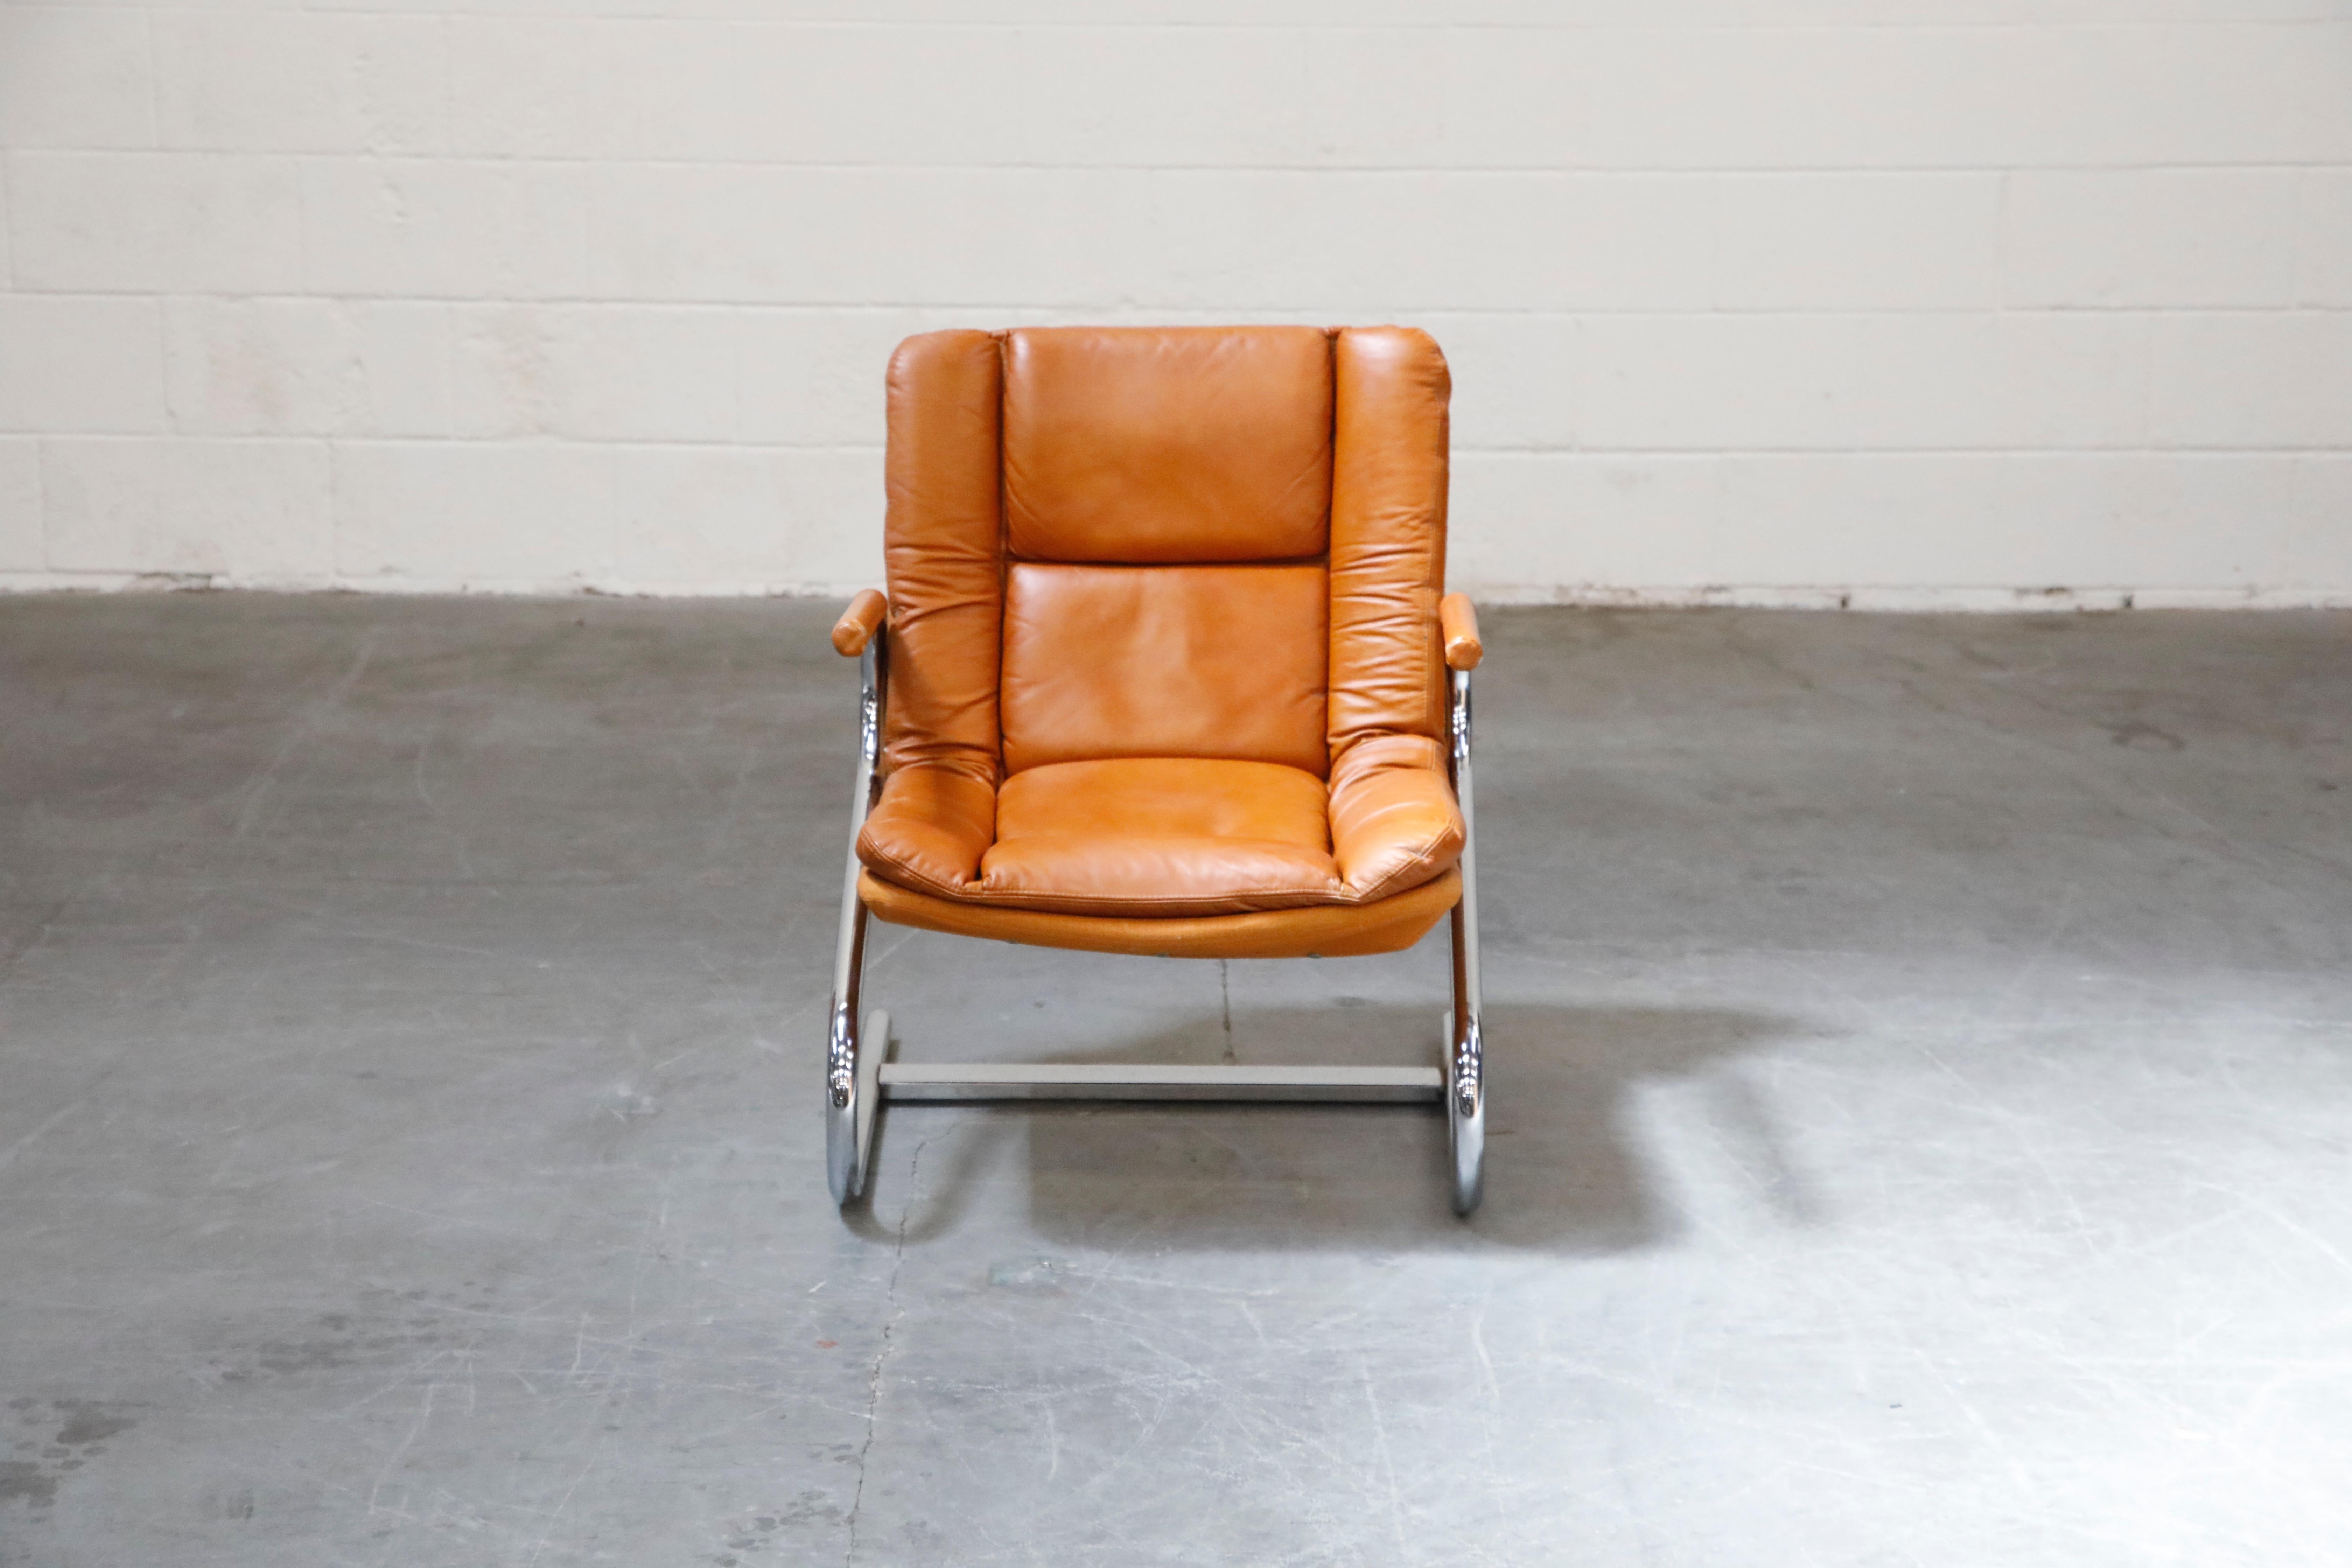 This stylish yet laid-back tubular lounge chair is attributed to Guido Faleschini for i4 Mariani for the Pace Collection. The seat and back retains its original lightly patinated cognac colored leather upholstery and are attached to graceful chromed